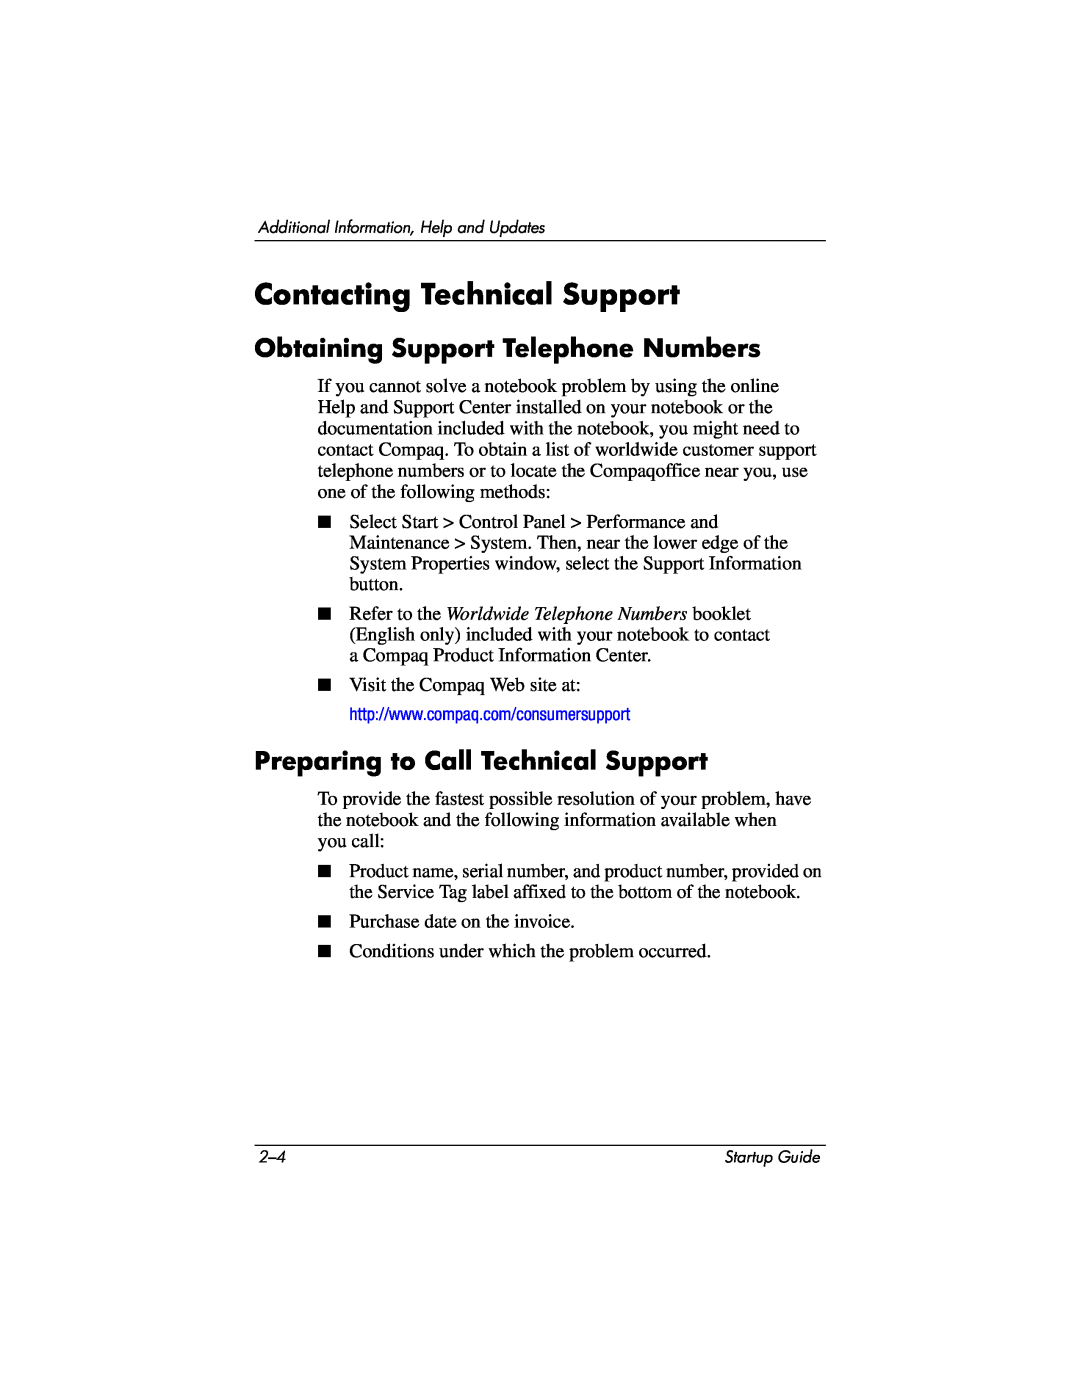 HP R3000 (Intel) Contacting Technical Support, Obtaining Support Telephone Numbers, Preparing to Call Technical Support 